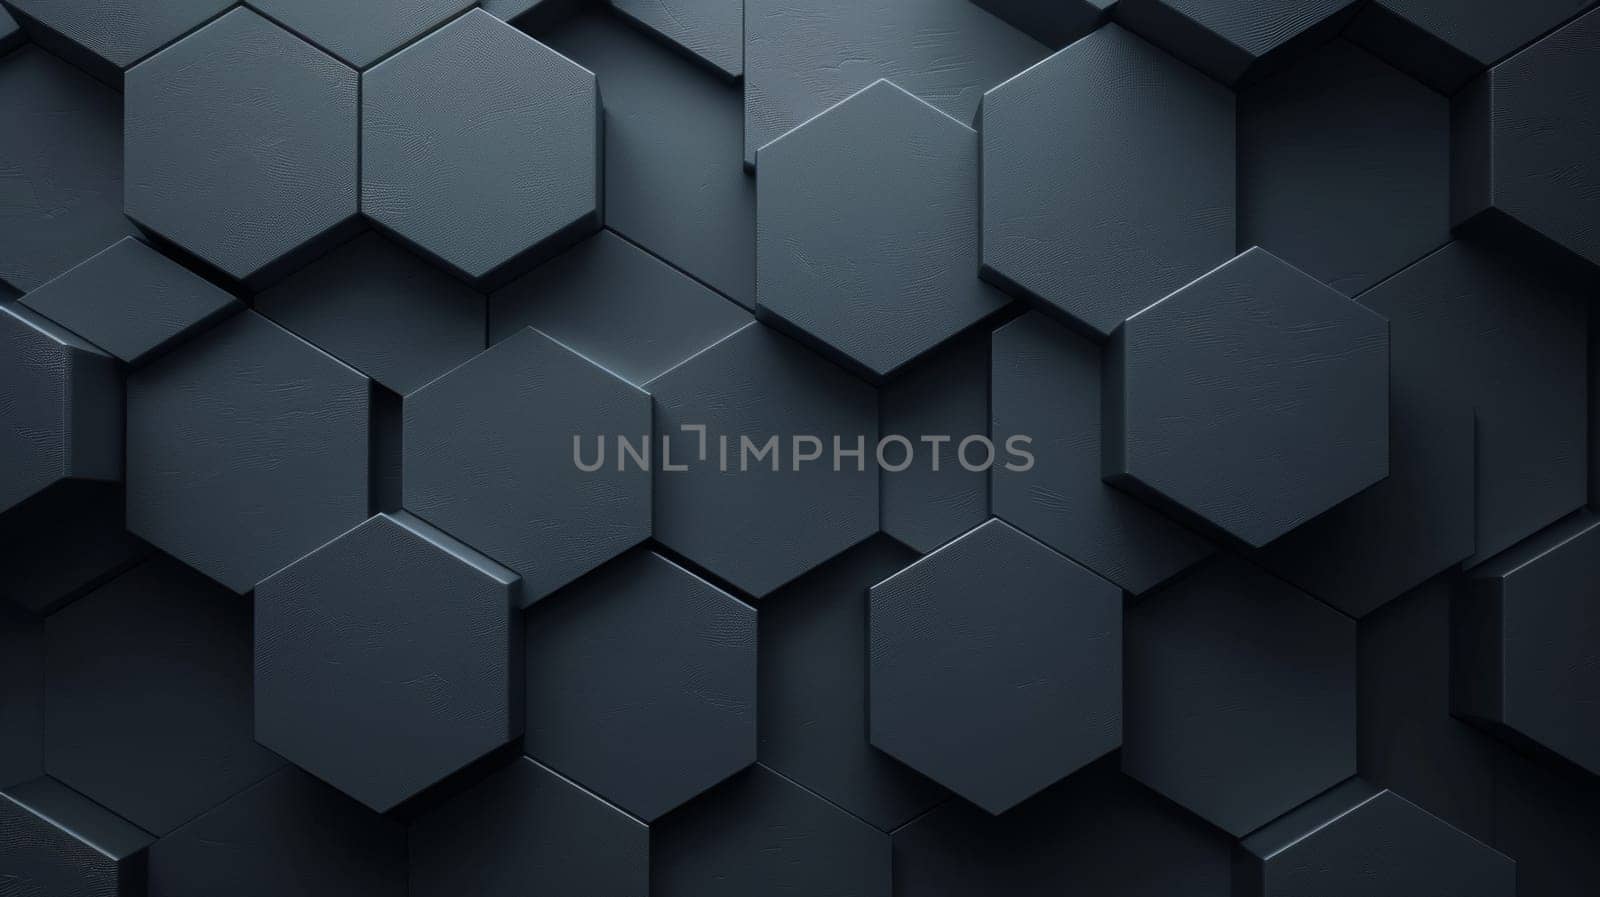 A black background with hexagons on it